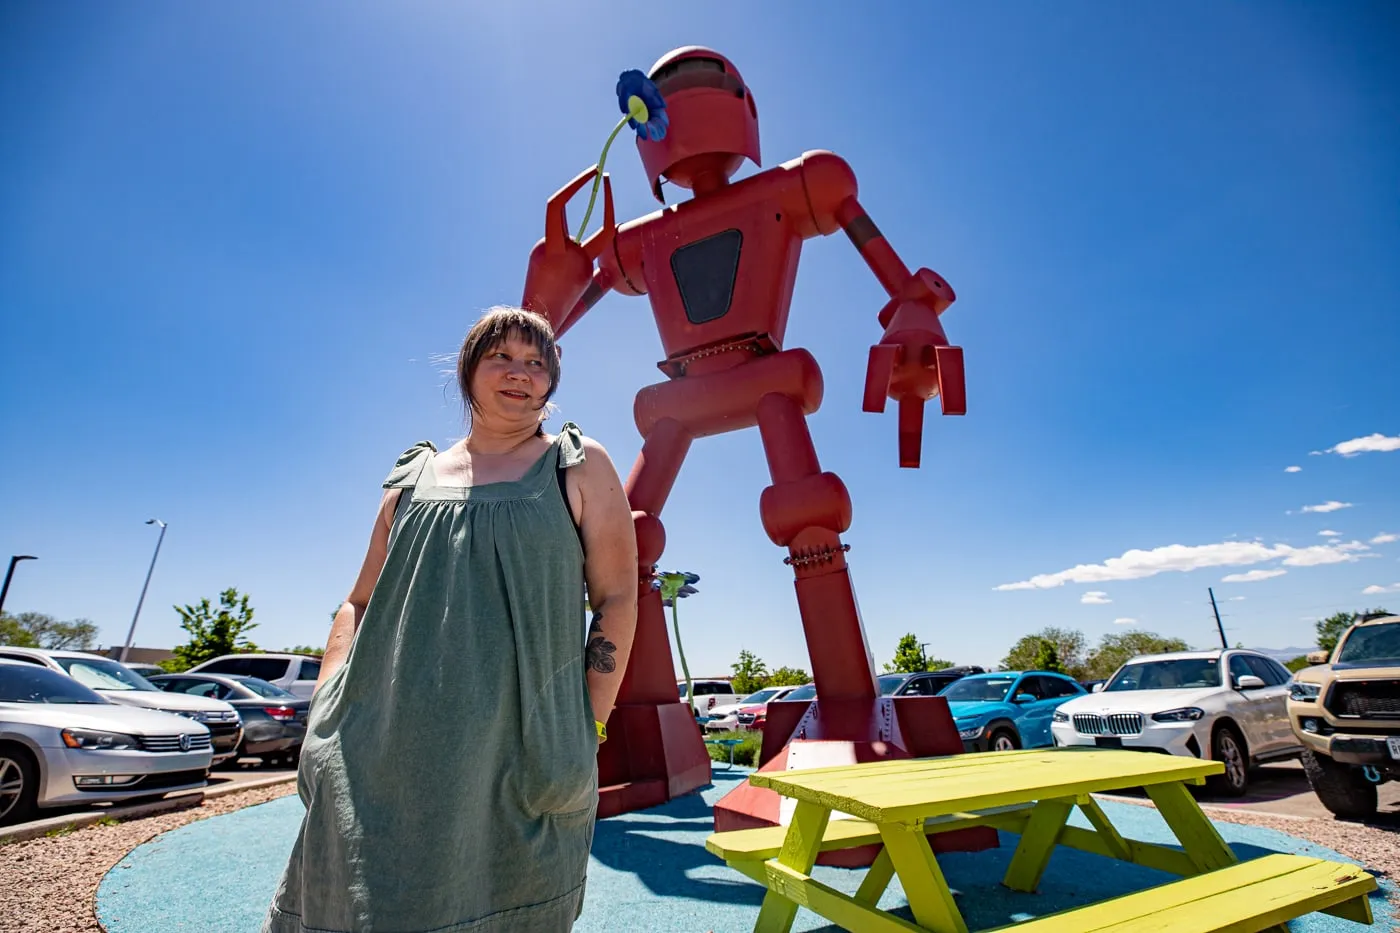 Becoming Human - Giant Robot at Meow Wolf in Santa Fe, New Mexico